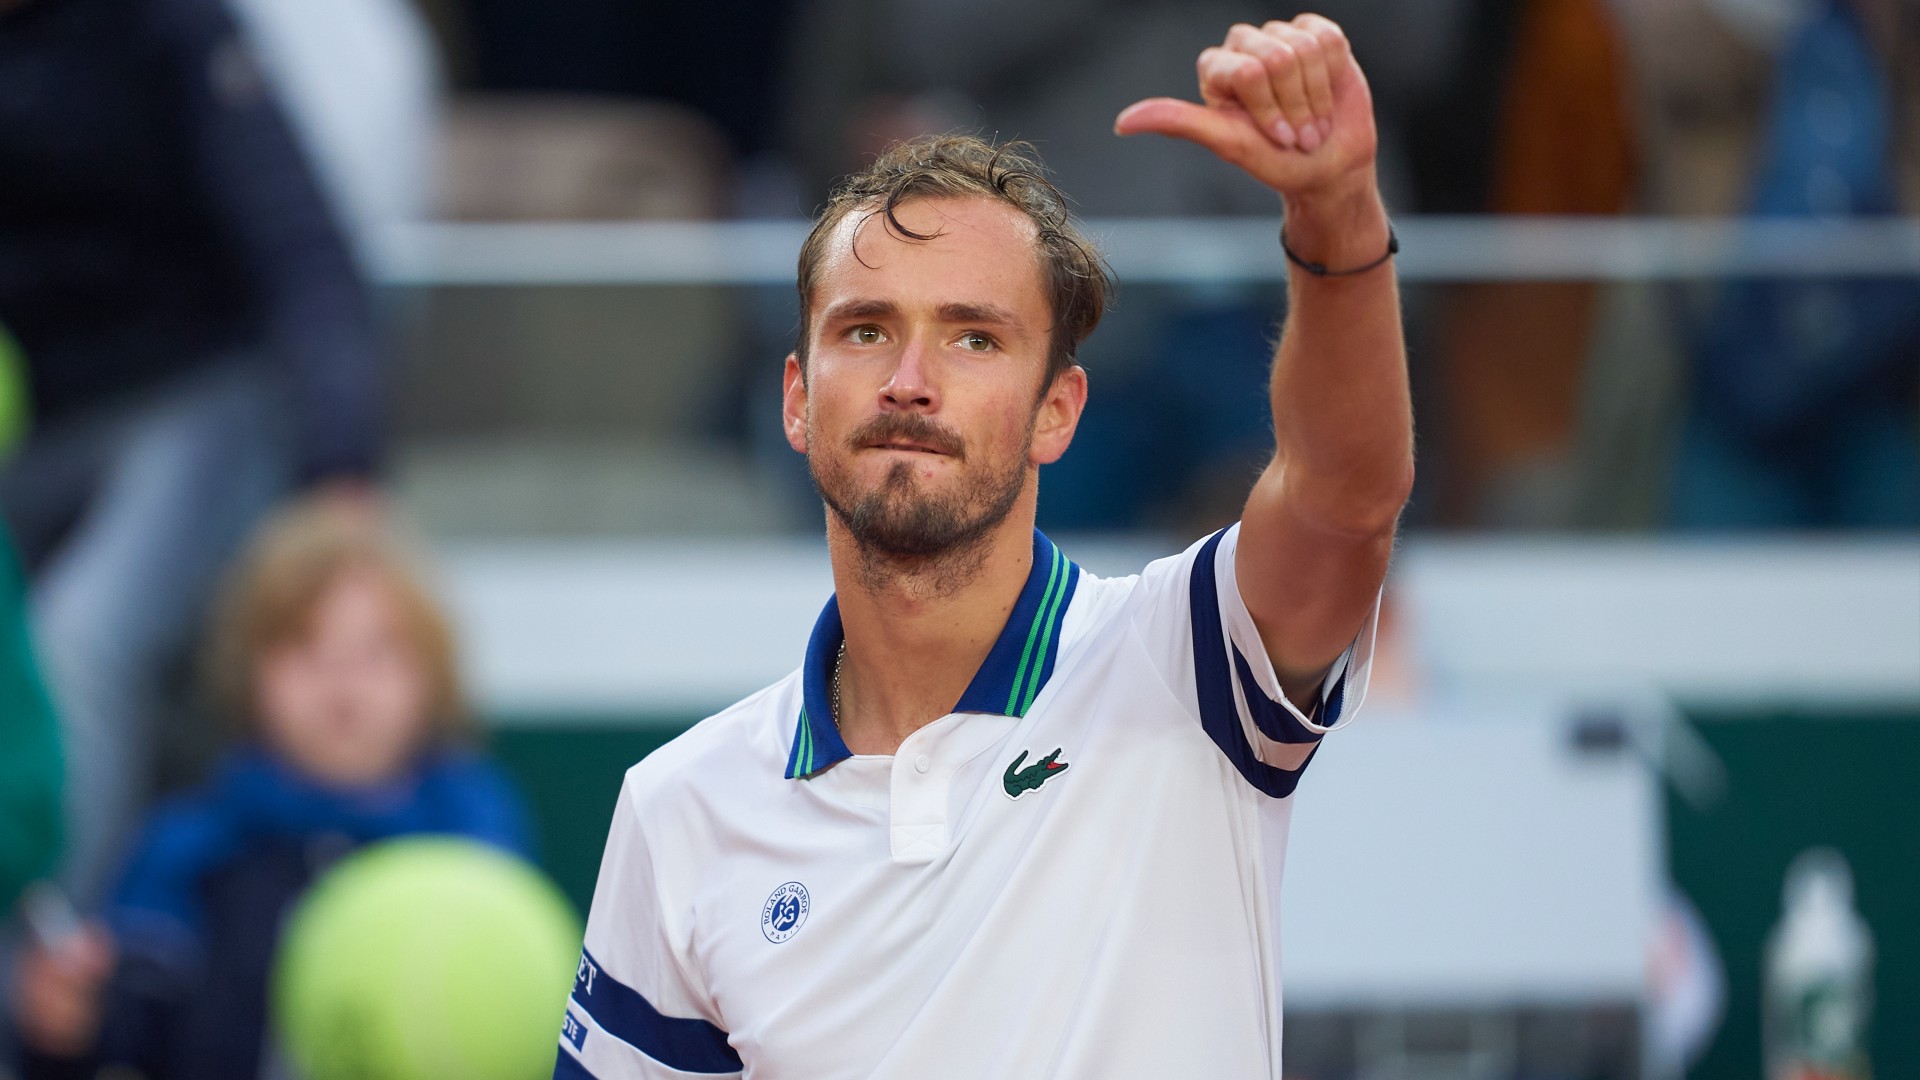 Medvedev out of Halle Open to Zhang